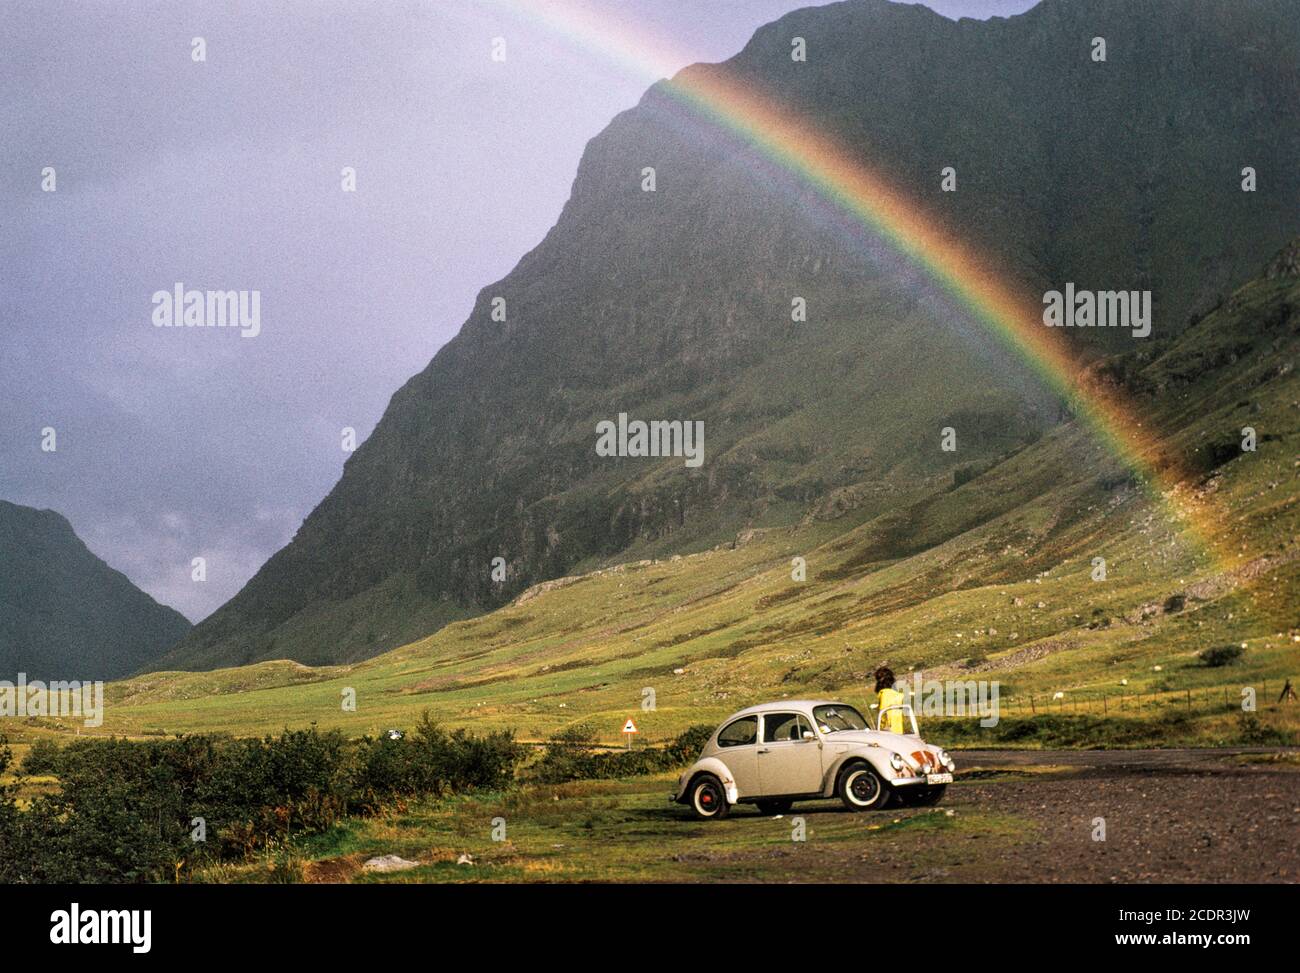 Tourists in a VW Beetle stop in Glencoe, Scotland, to view a nearby rainbow in front of the rockface of Aonach Dubh. Archive image c.1980s. High resolution scan from transparency, August 2020. Credit: Malcolm Park/Alamy. Stock Photo